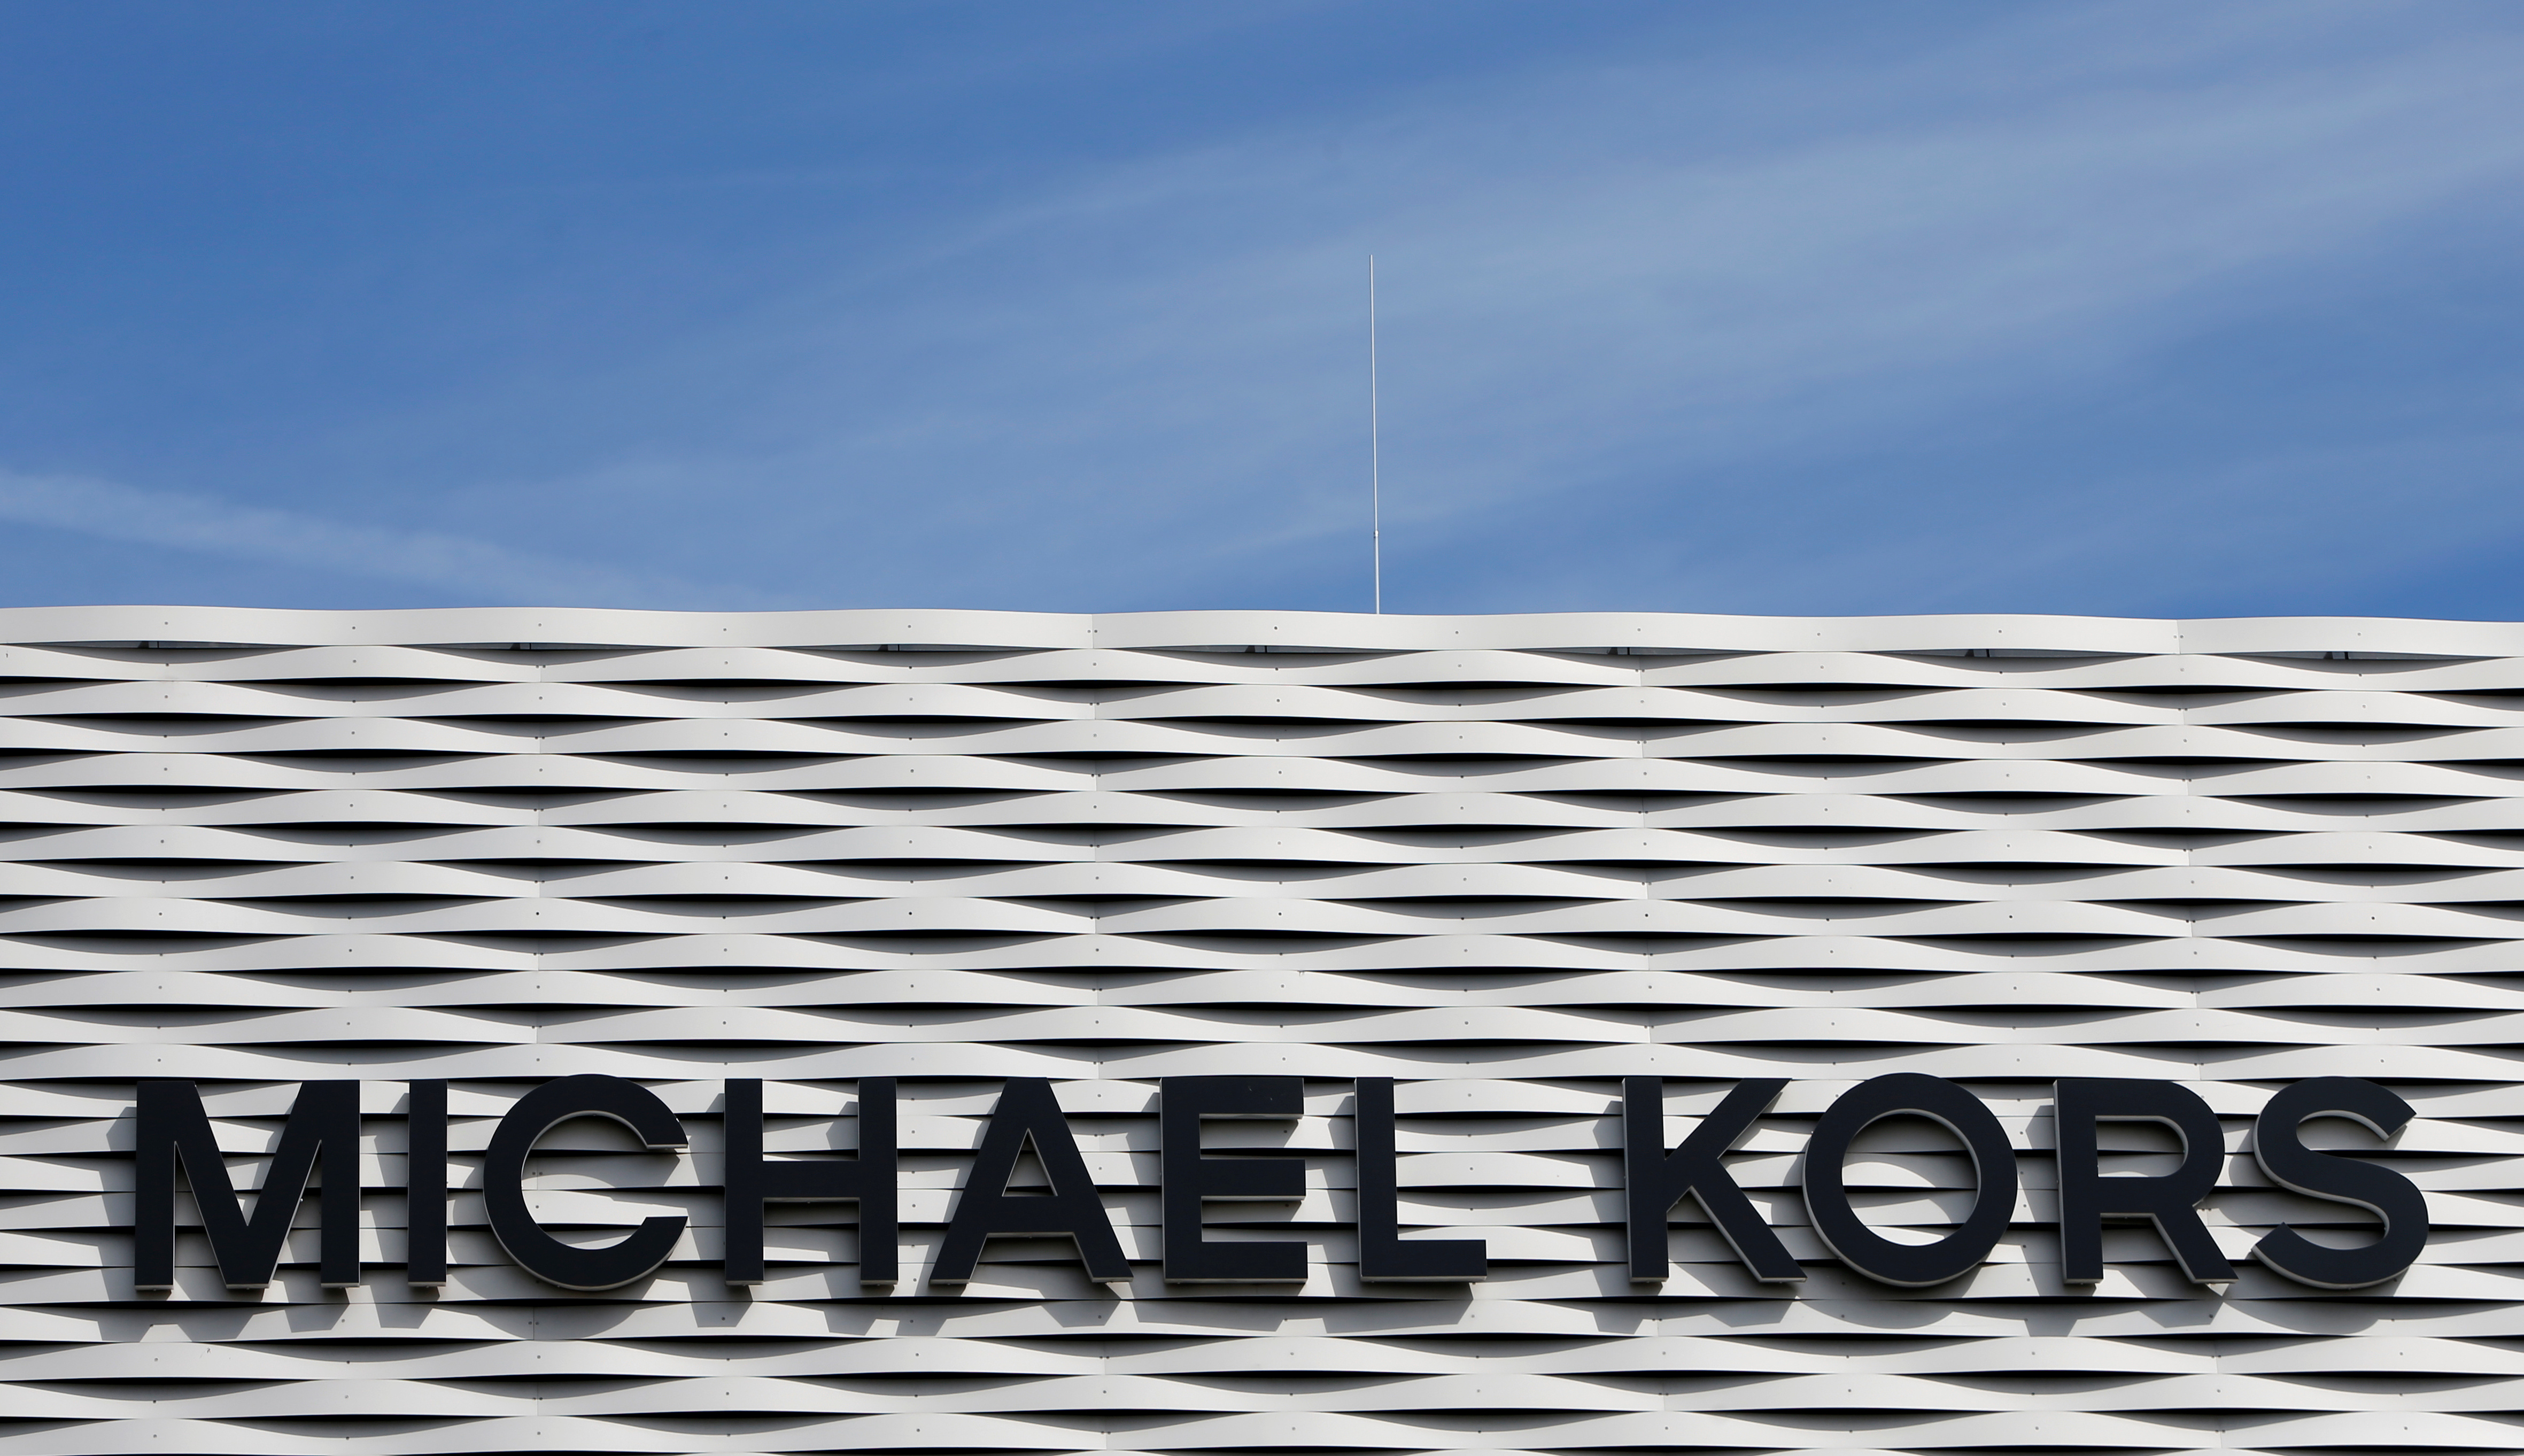 CEO of Michael Kors Owner (CPRI) Says Prices Will Go Up 'Considerably' -  Bloomberg